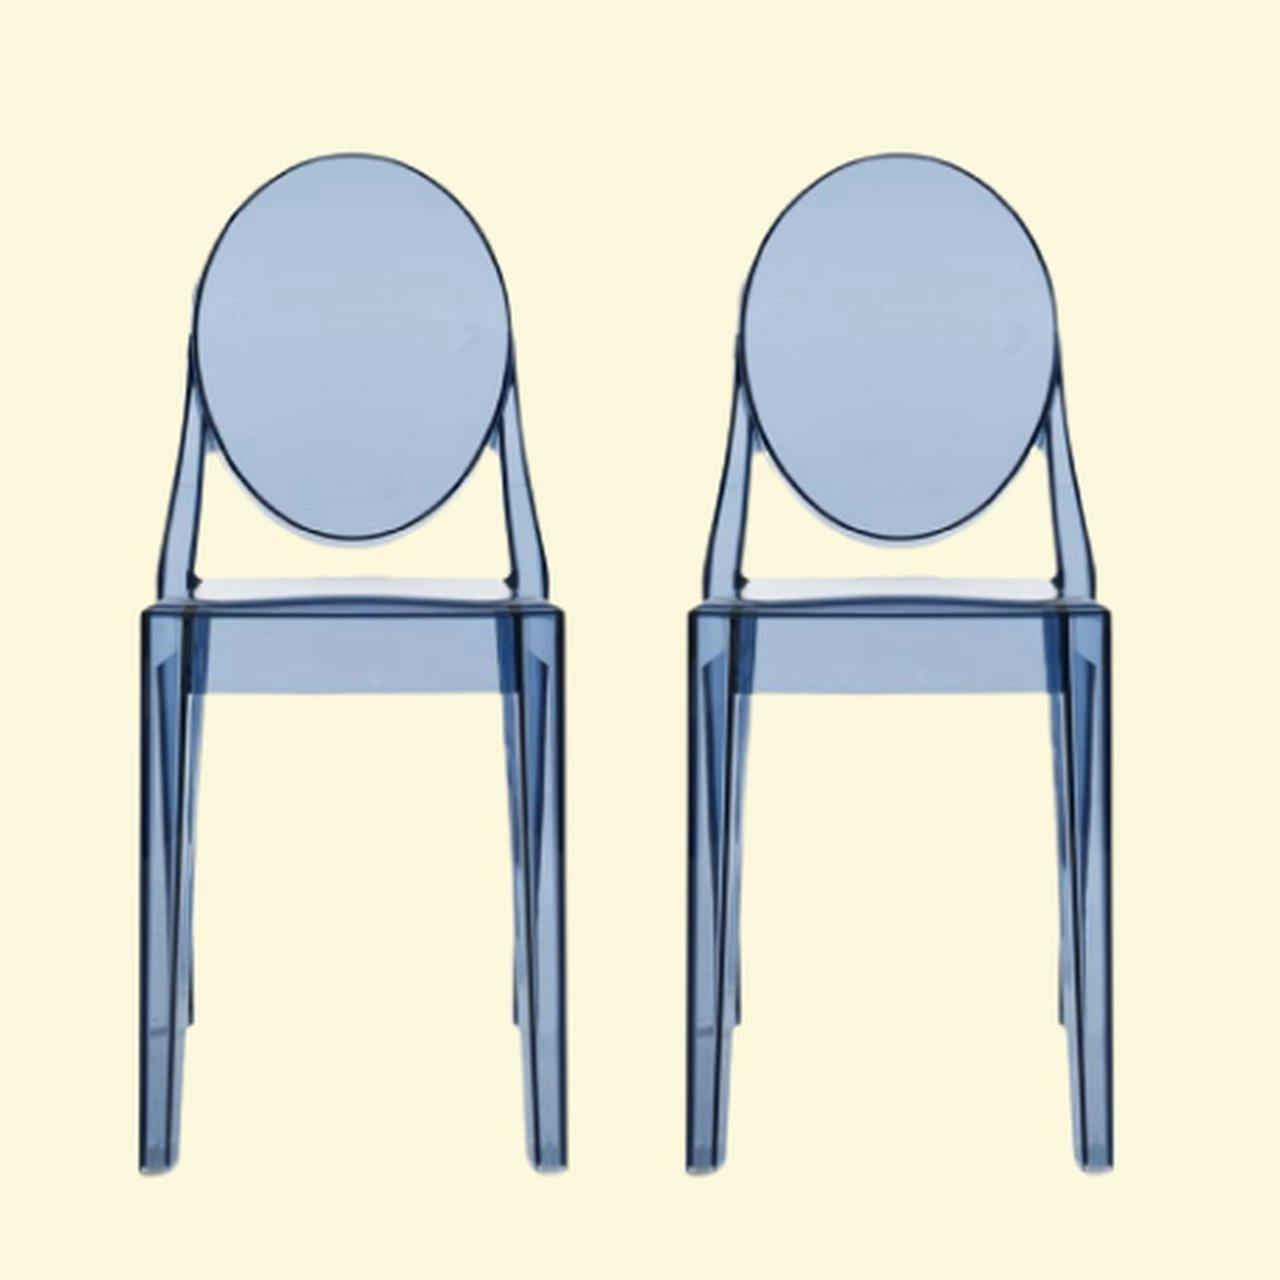 Ole Wanscher Dining chairs